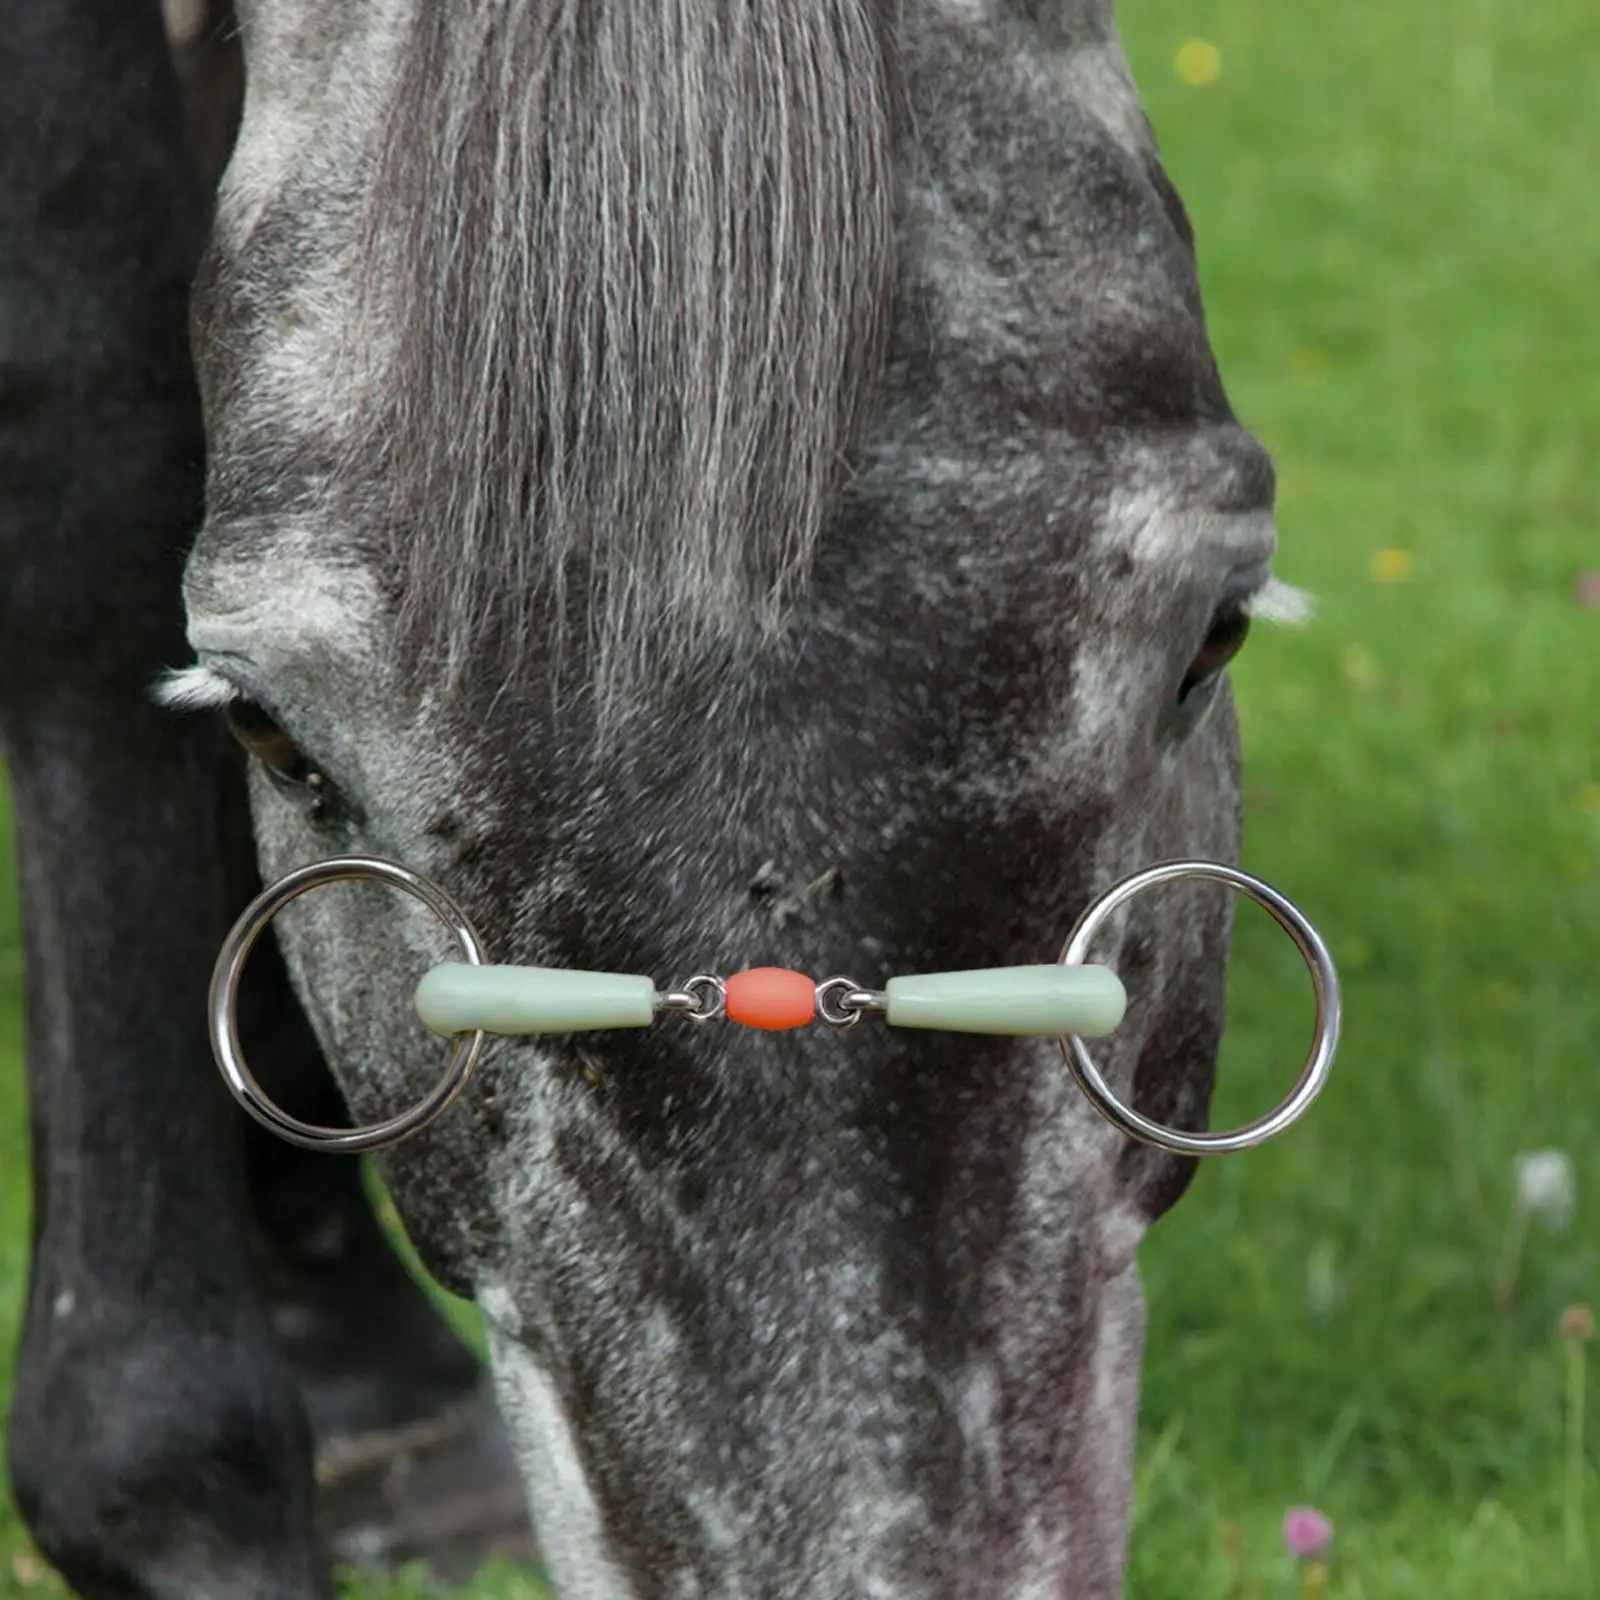 horse Mouth Bit Snaffle Bits Supplies Bit Comfort Stainless Steel Flavor for Equipment Training Cheek Horse Chewing